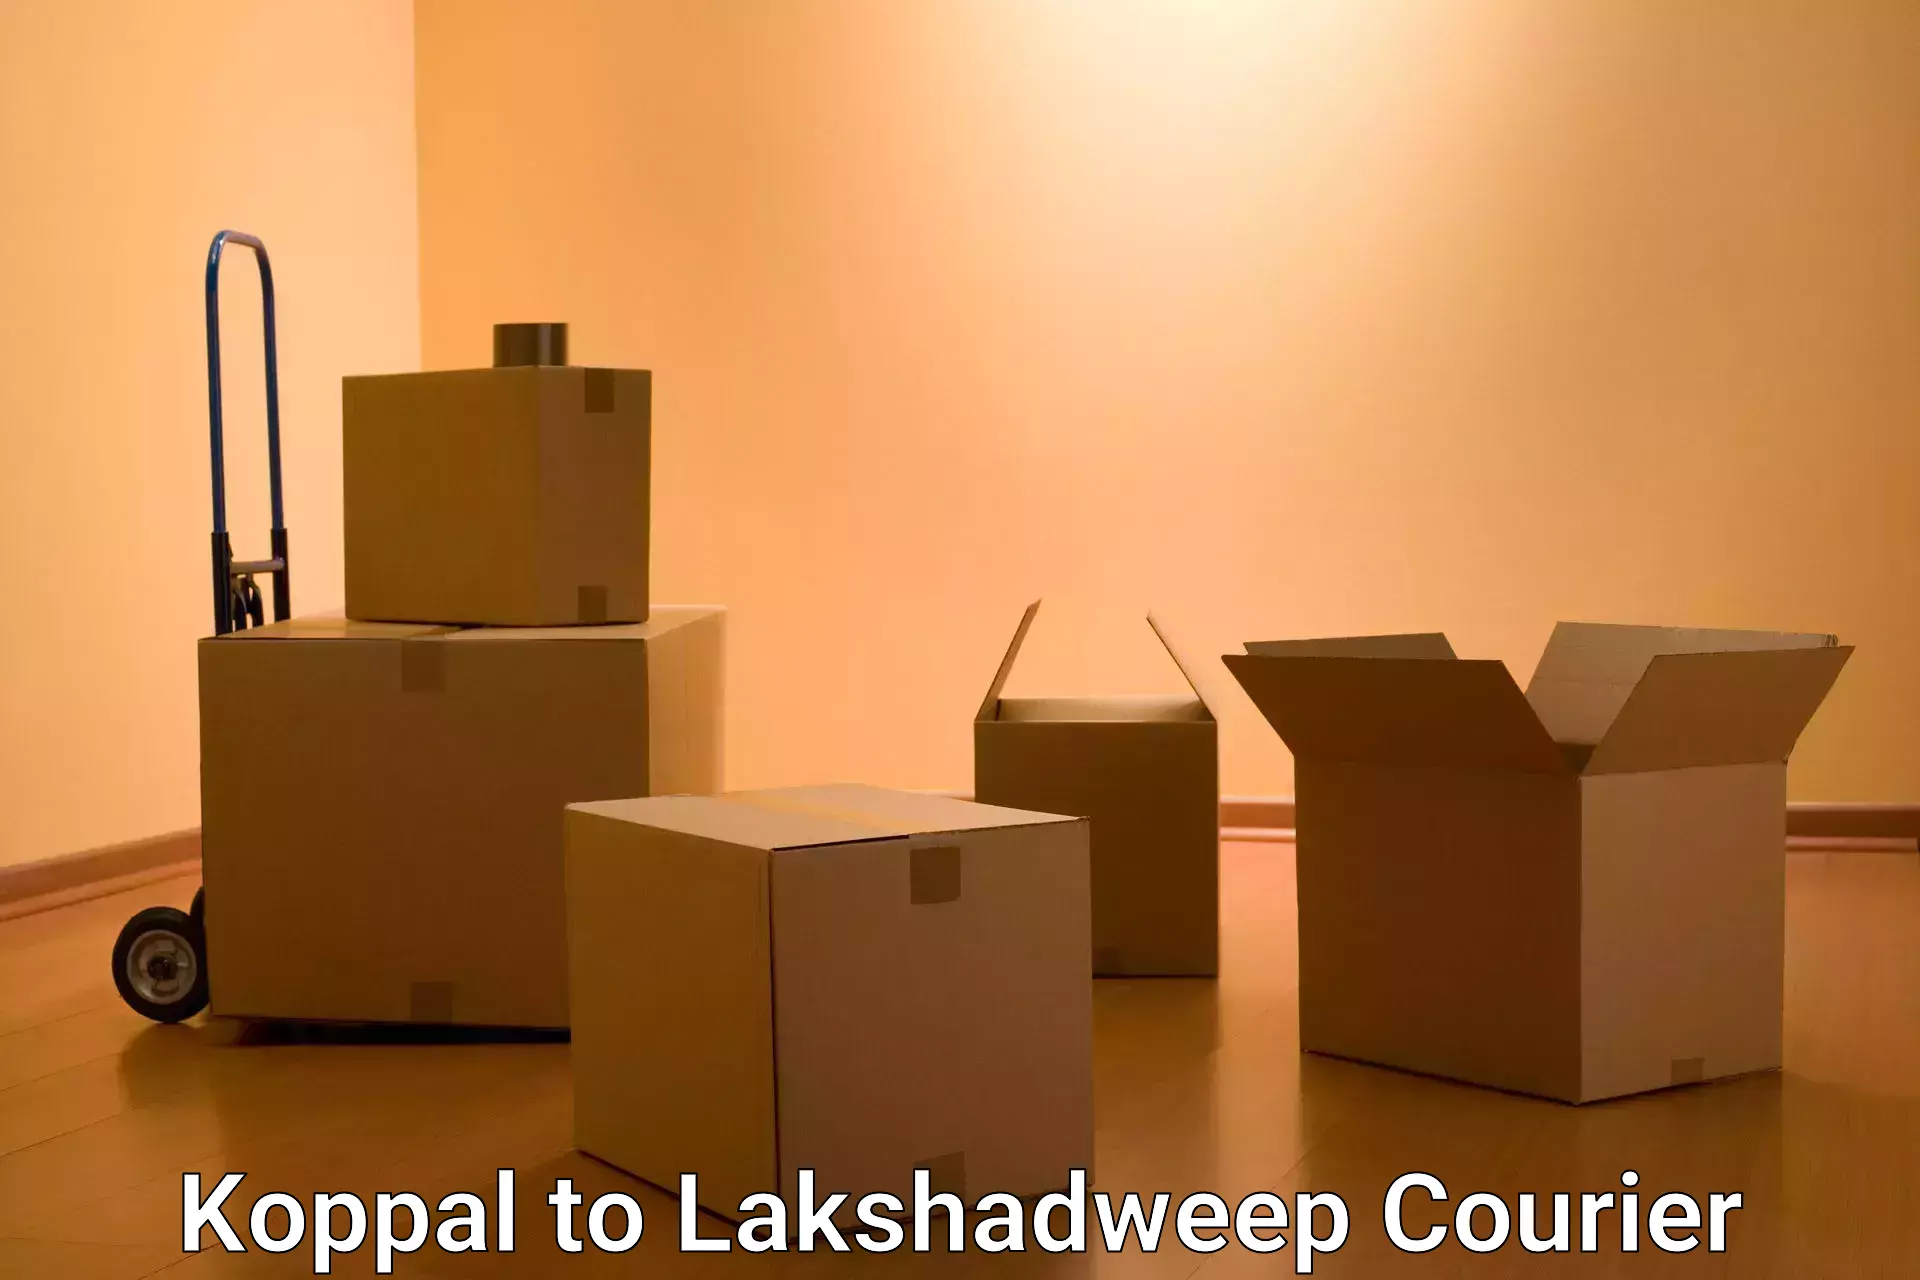 Same-day delivery options Koppal to Lakshadweep